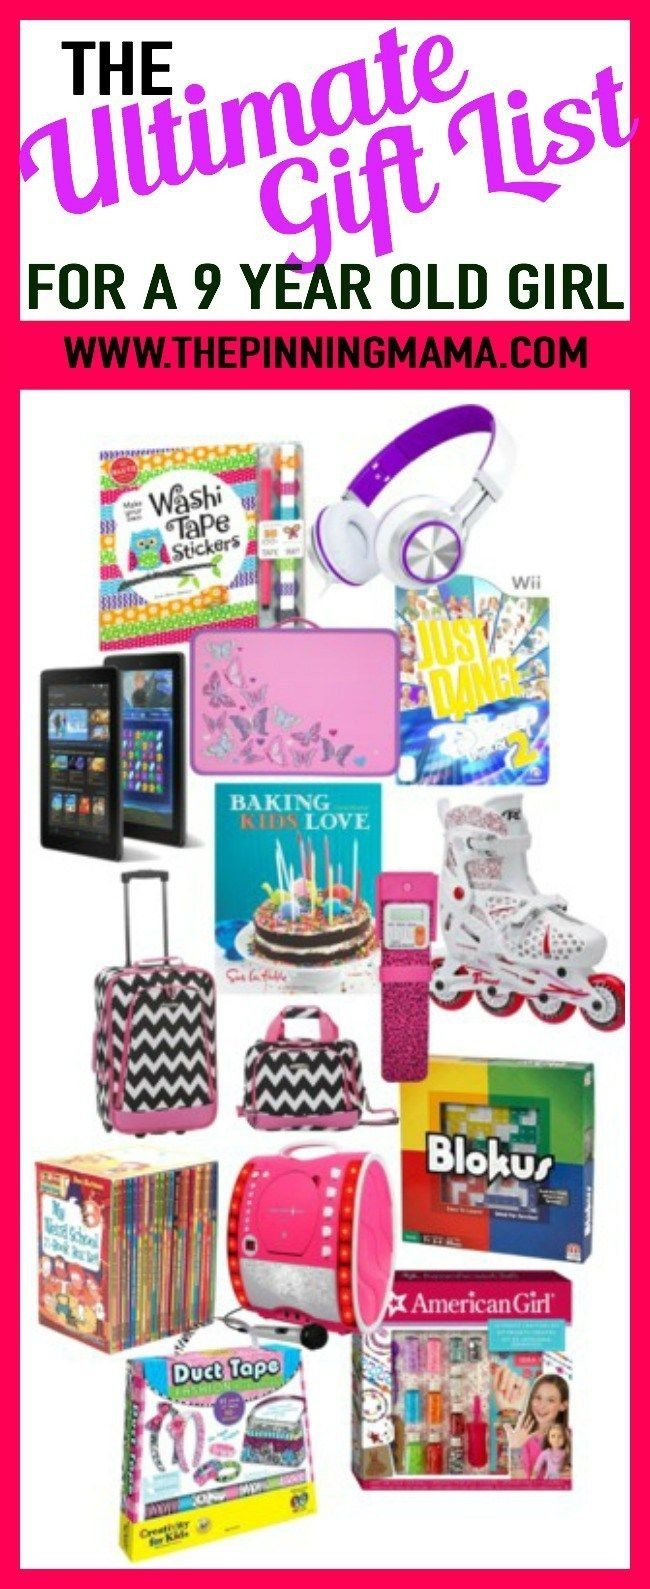 Gift Ideas For Girls Age 9
 10 Lovable Gift Ideas For Girls Age 9 2020